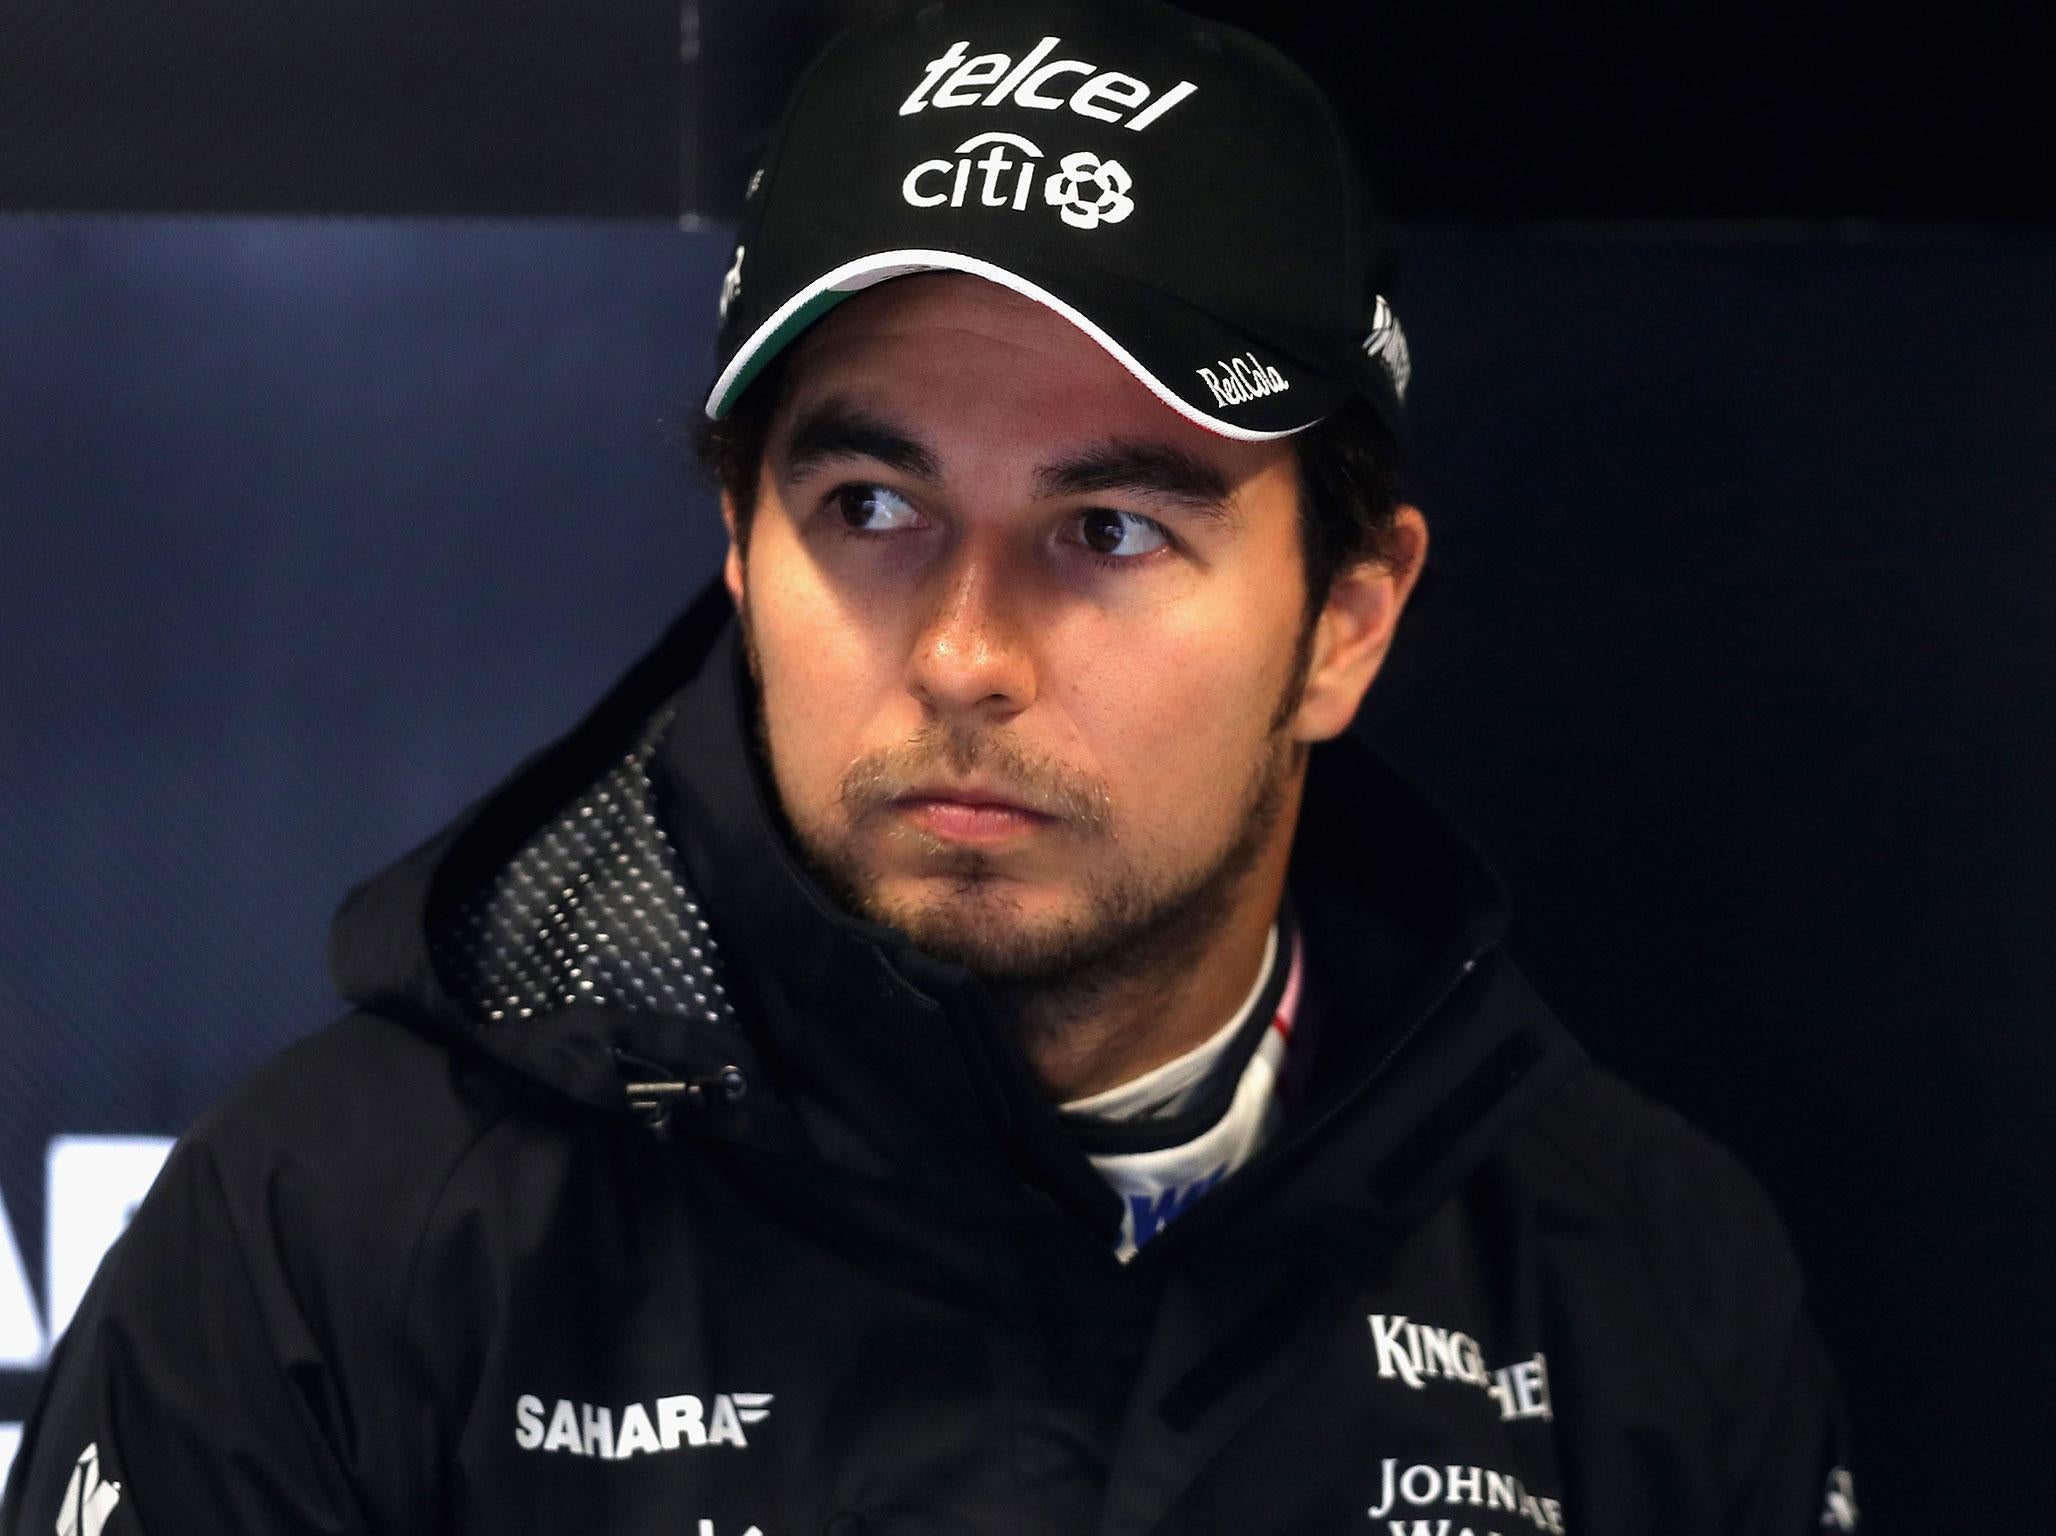 Sergio Perez has acted to help the victims of an earthquake in his homeland